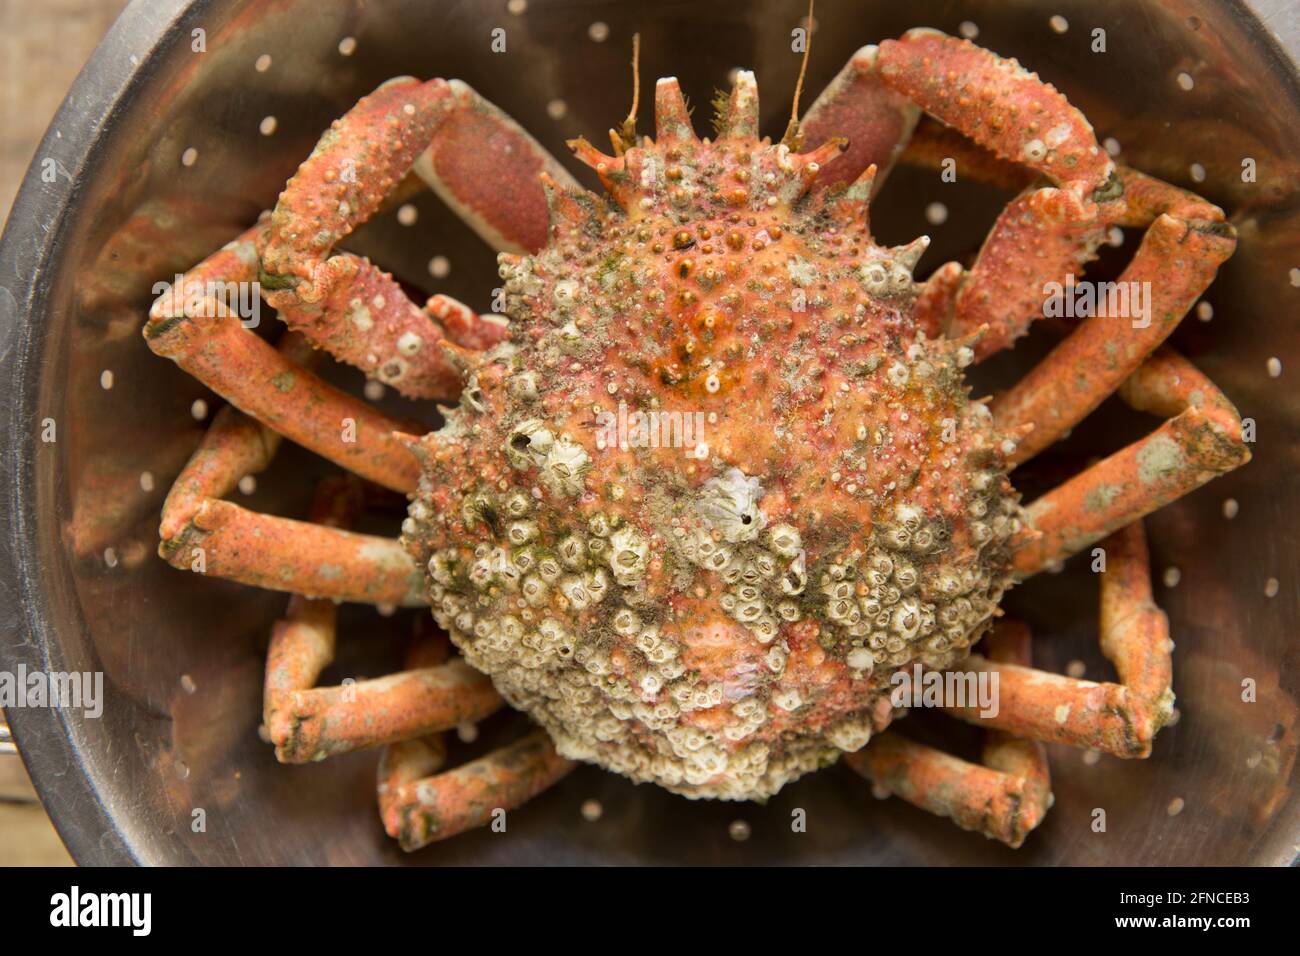 A boiled, cooked spider crab, Maja brachydactyla, that has been left to cool after cooking, Spider crabs are common in parts of the UK and are being s Stock Photo